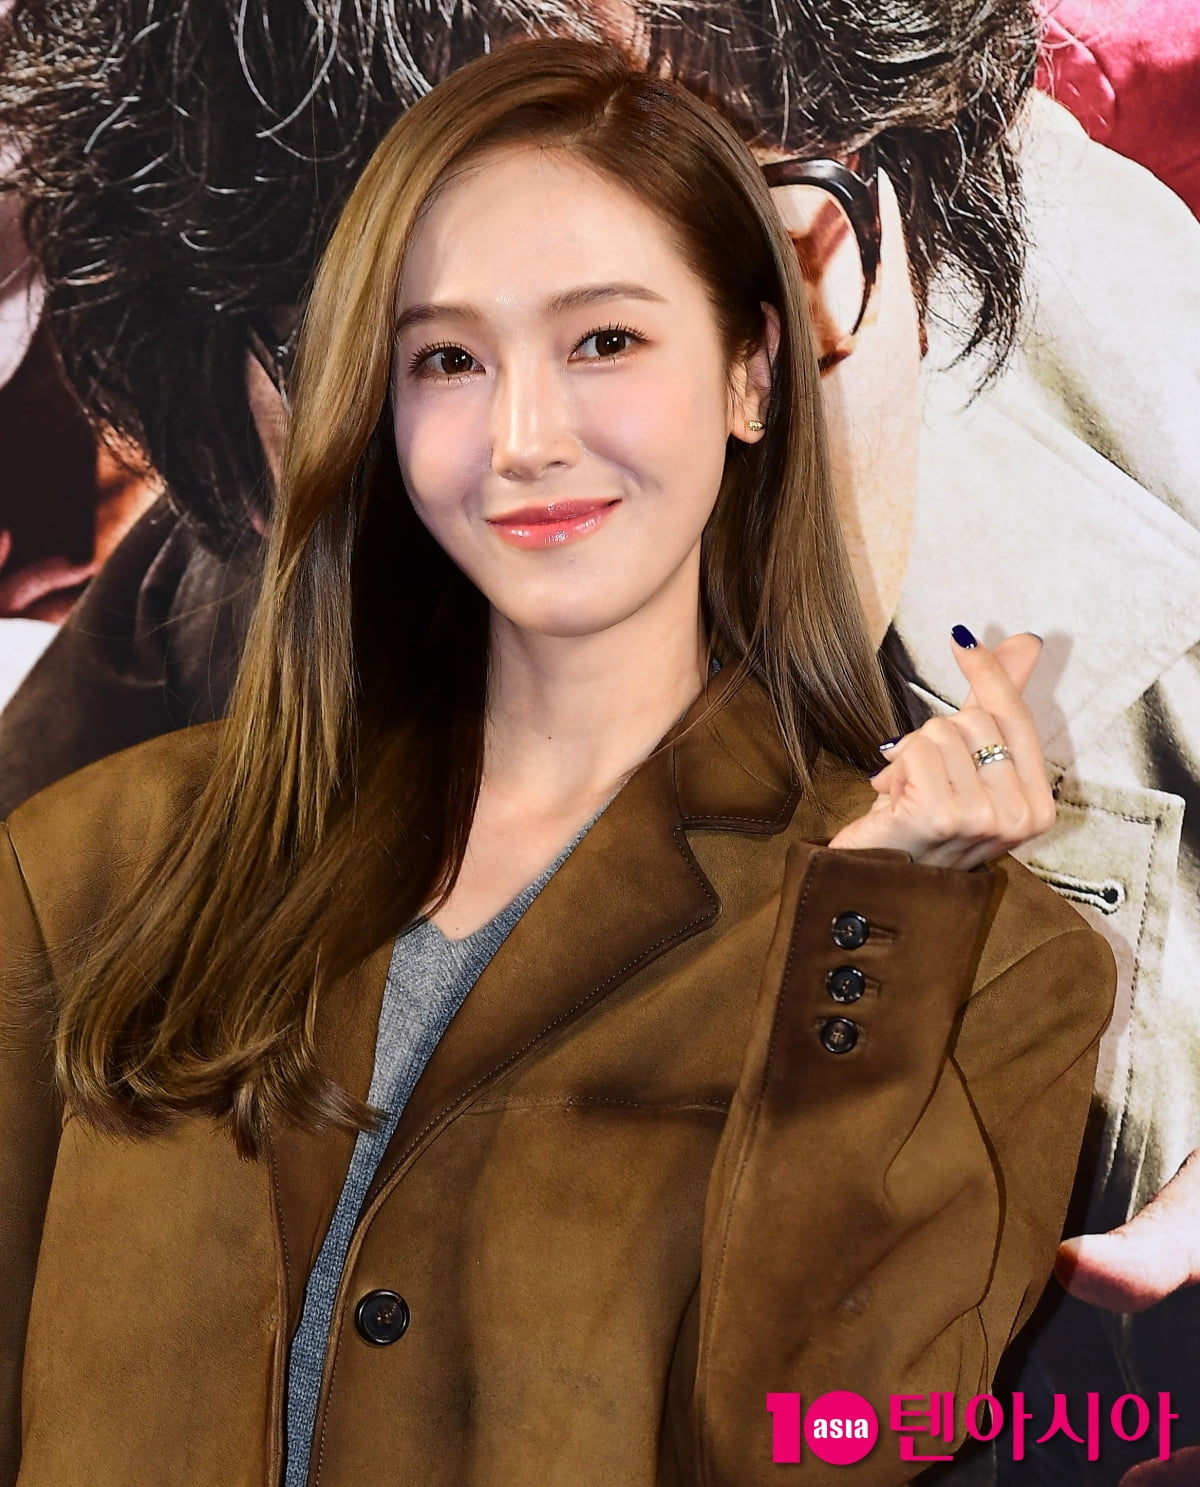 Jessica confesses her feelings after leaving Girls' Generation "It was the most difficult and dark time of my life" 